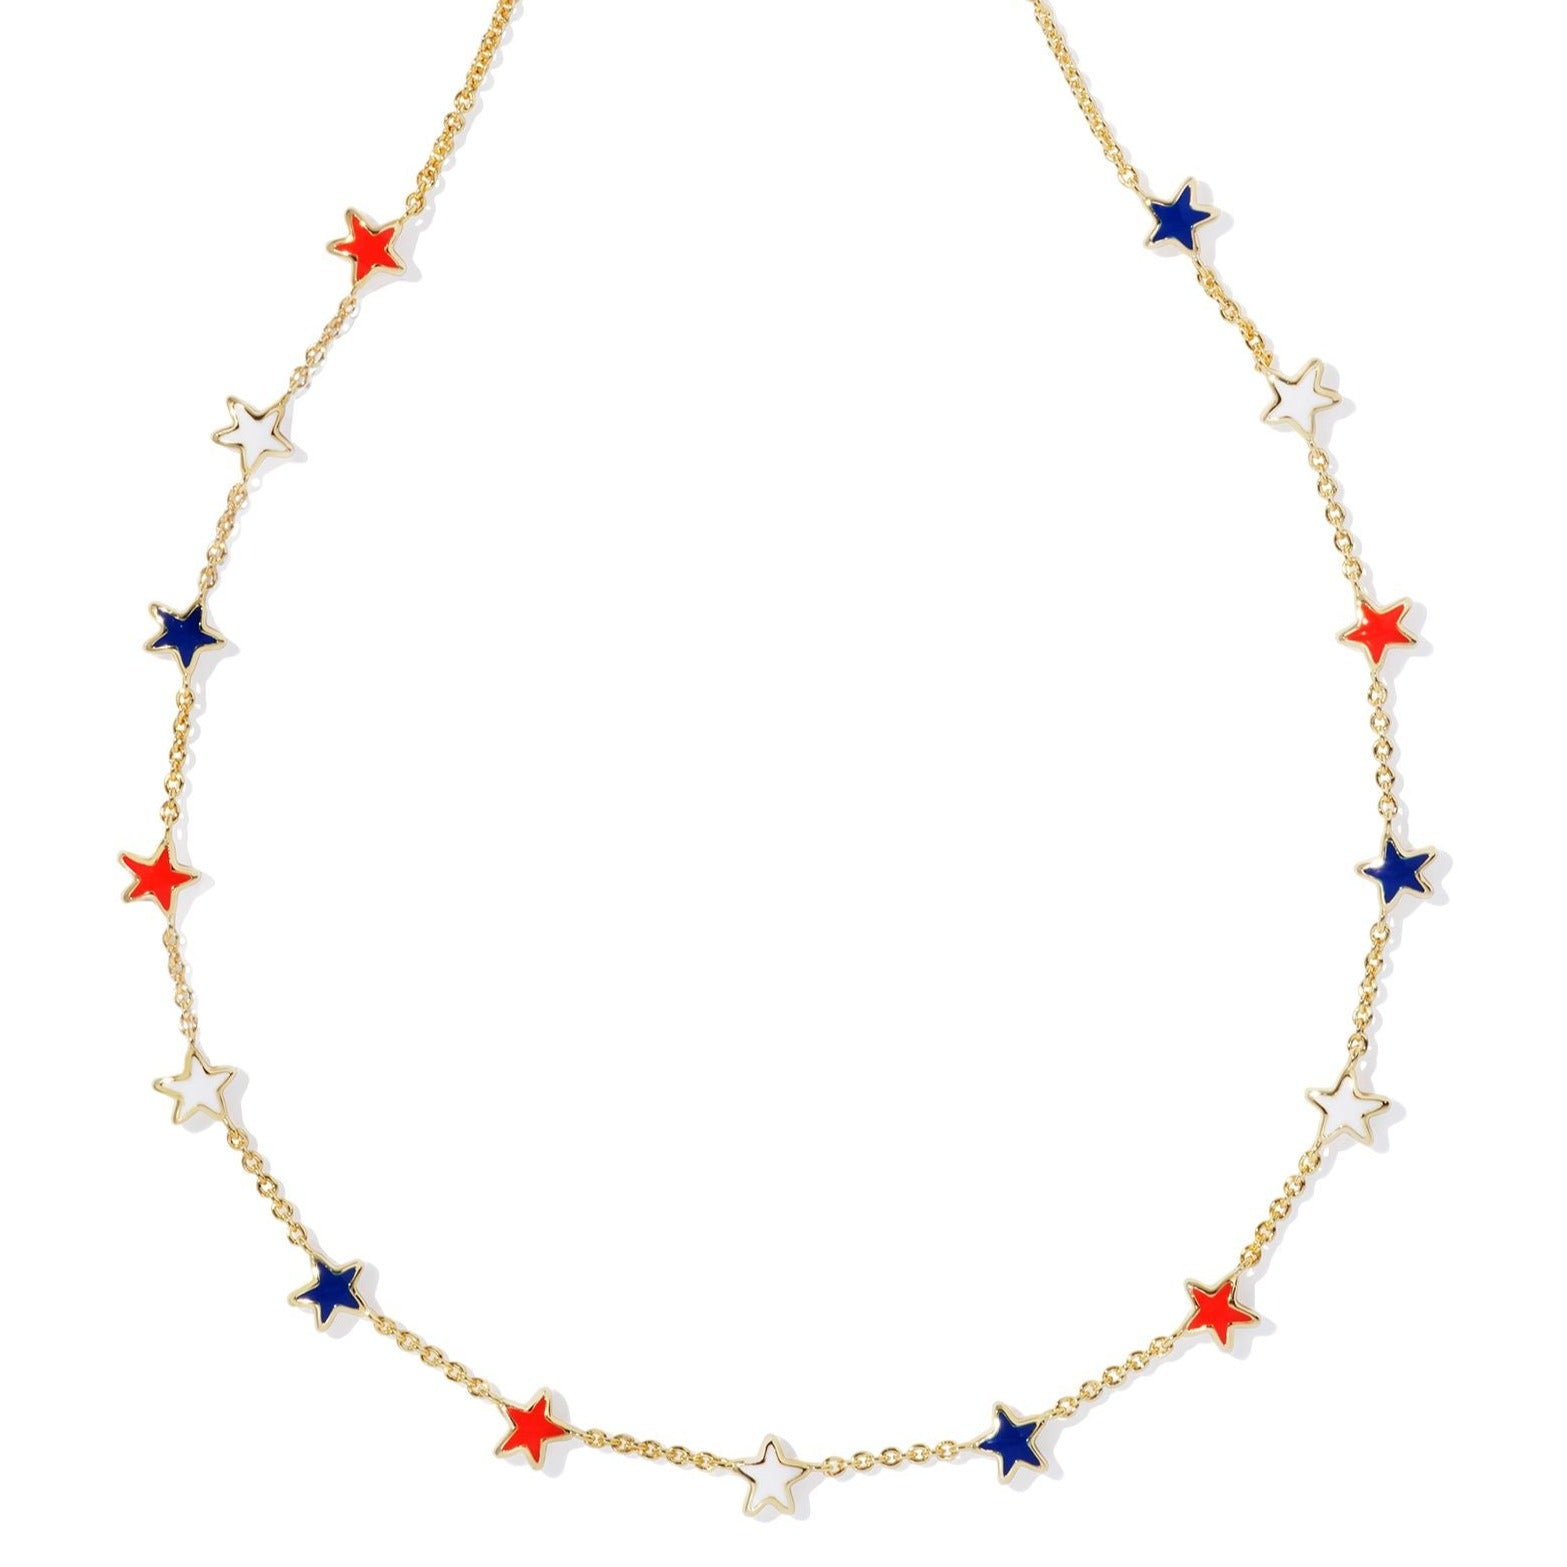 Kendra Scott | Sierra Gold Star Strand Necklace in Red, White, and Blue Mix - Giddy Up Glamour Boutique